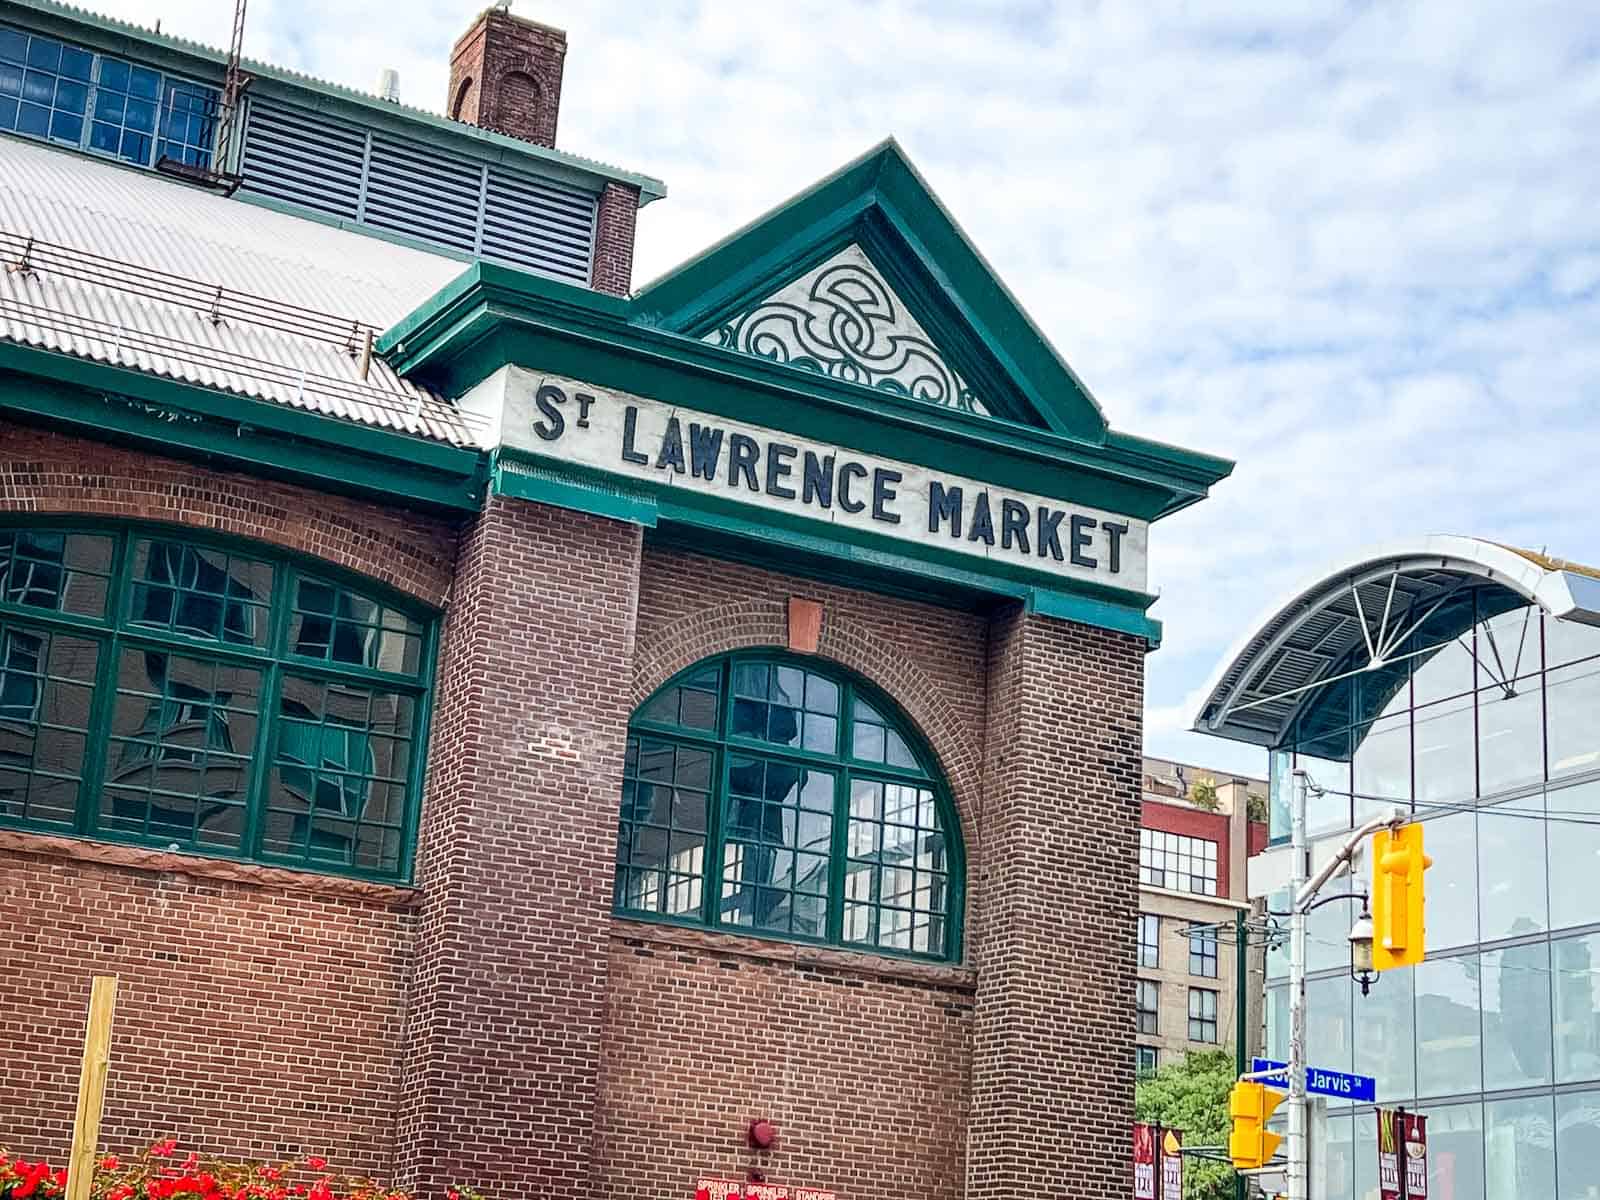 <p>St. Lawrence Market offers a vibrant culinary experience in the heart of Toronto. Explore a wide variety of fresh produce, artisanal foods, and unique products. The market’s bustling atmosphere and friendly vendors create an inviting experience. It’s a must-visit for food lovers and curious travelers alike.<br><strong>Read more: </strong><a href="https://allthebestspots.com/st-lawrence-market-toronto/?utm_source=msn&utm_medium=page&utm_campaign=msn">St. Lawrence Market, Toronto</a></p>